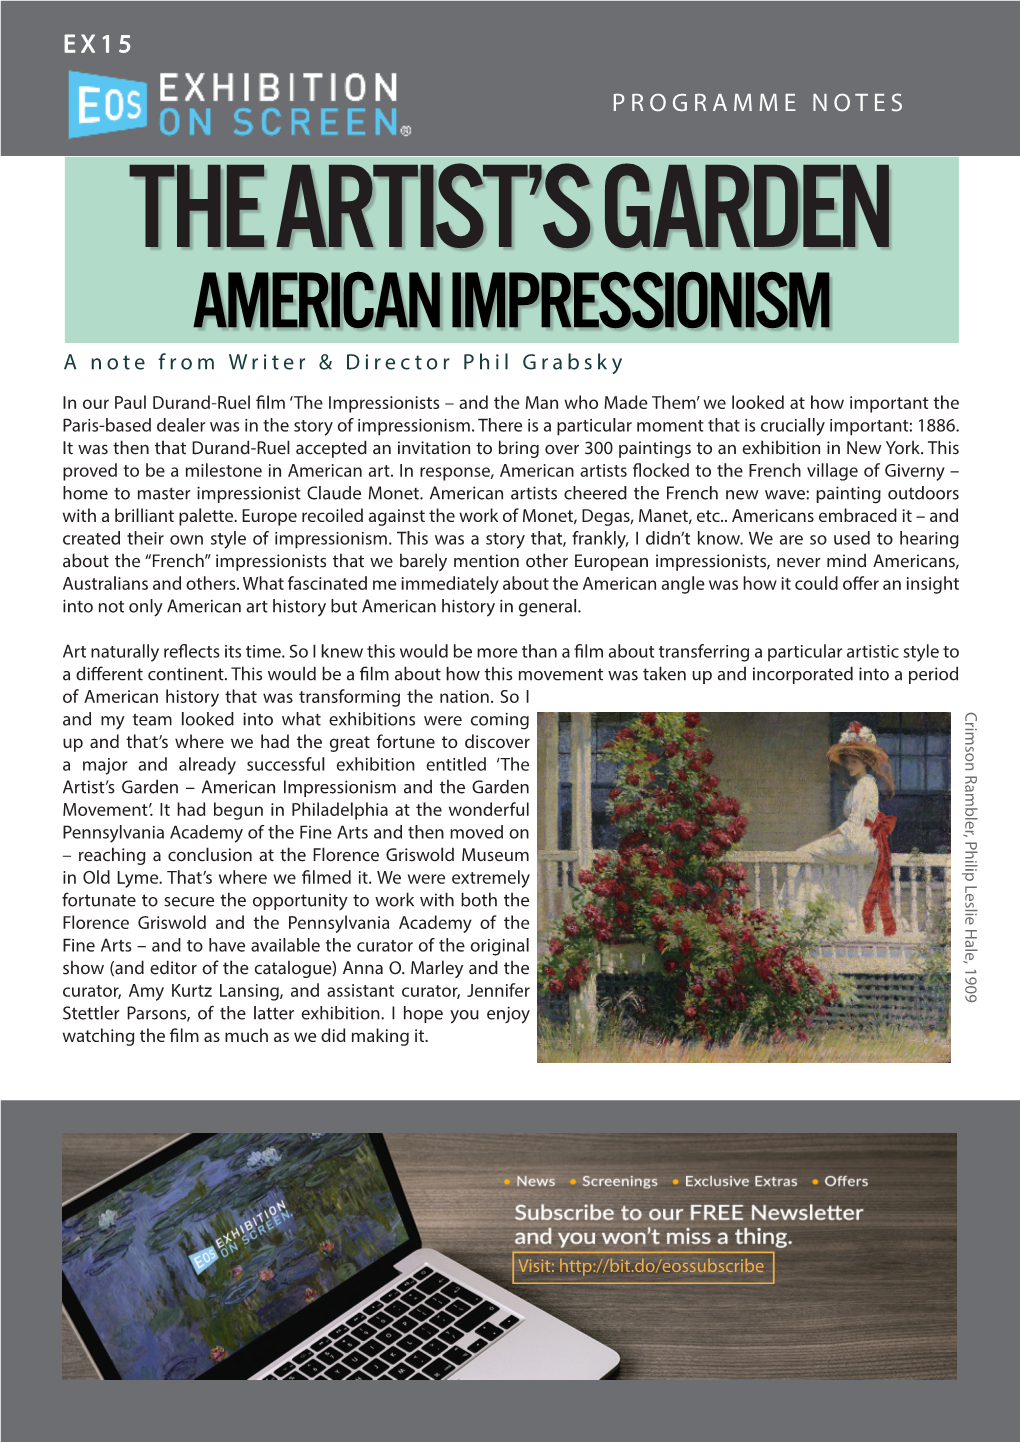 AMERICAN IMPRESSIONISM a Note from Writer & Director Phil Grabsky